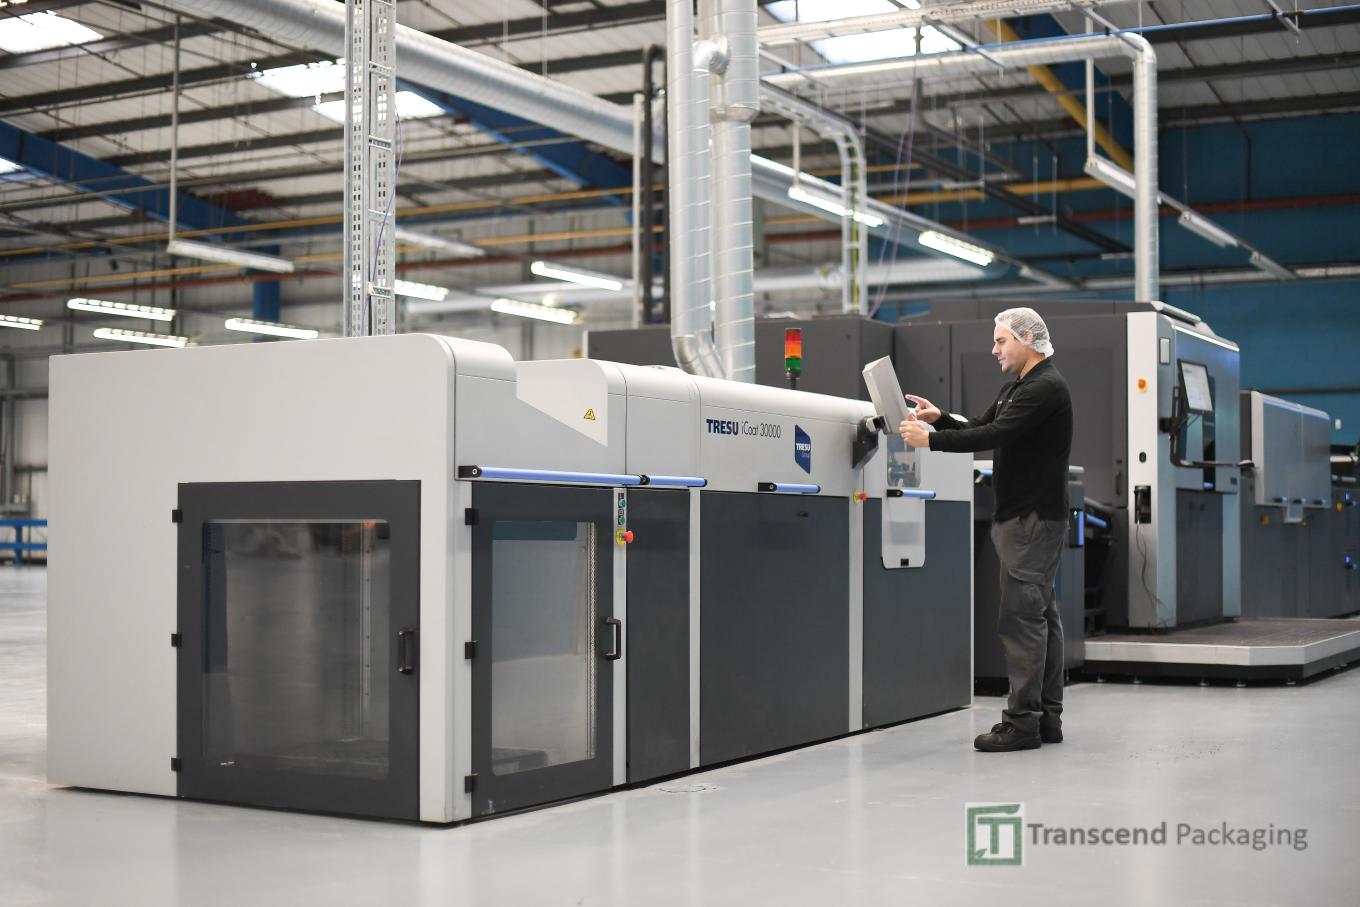 A Transcend Packaging employee using a console to set up one of its packaging machines